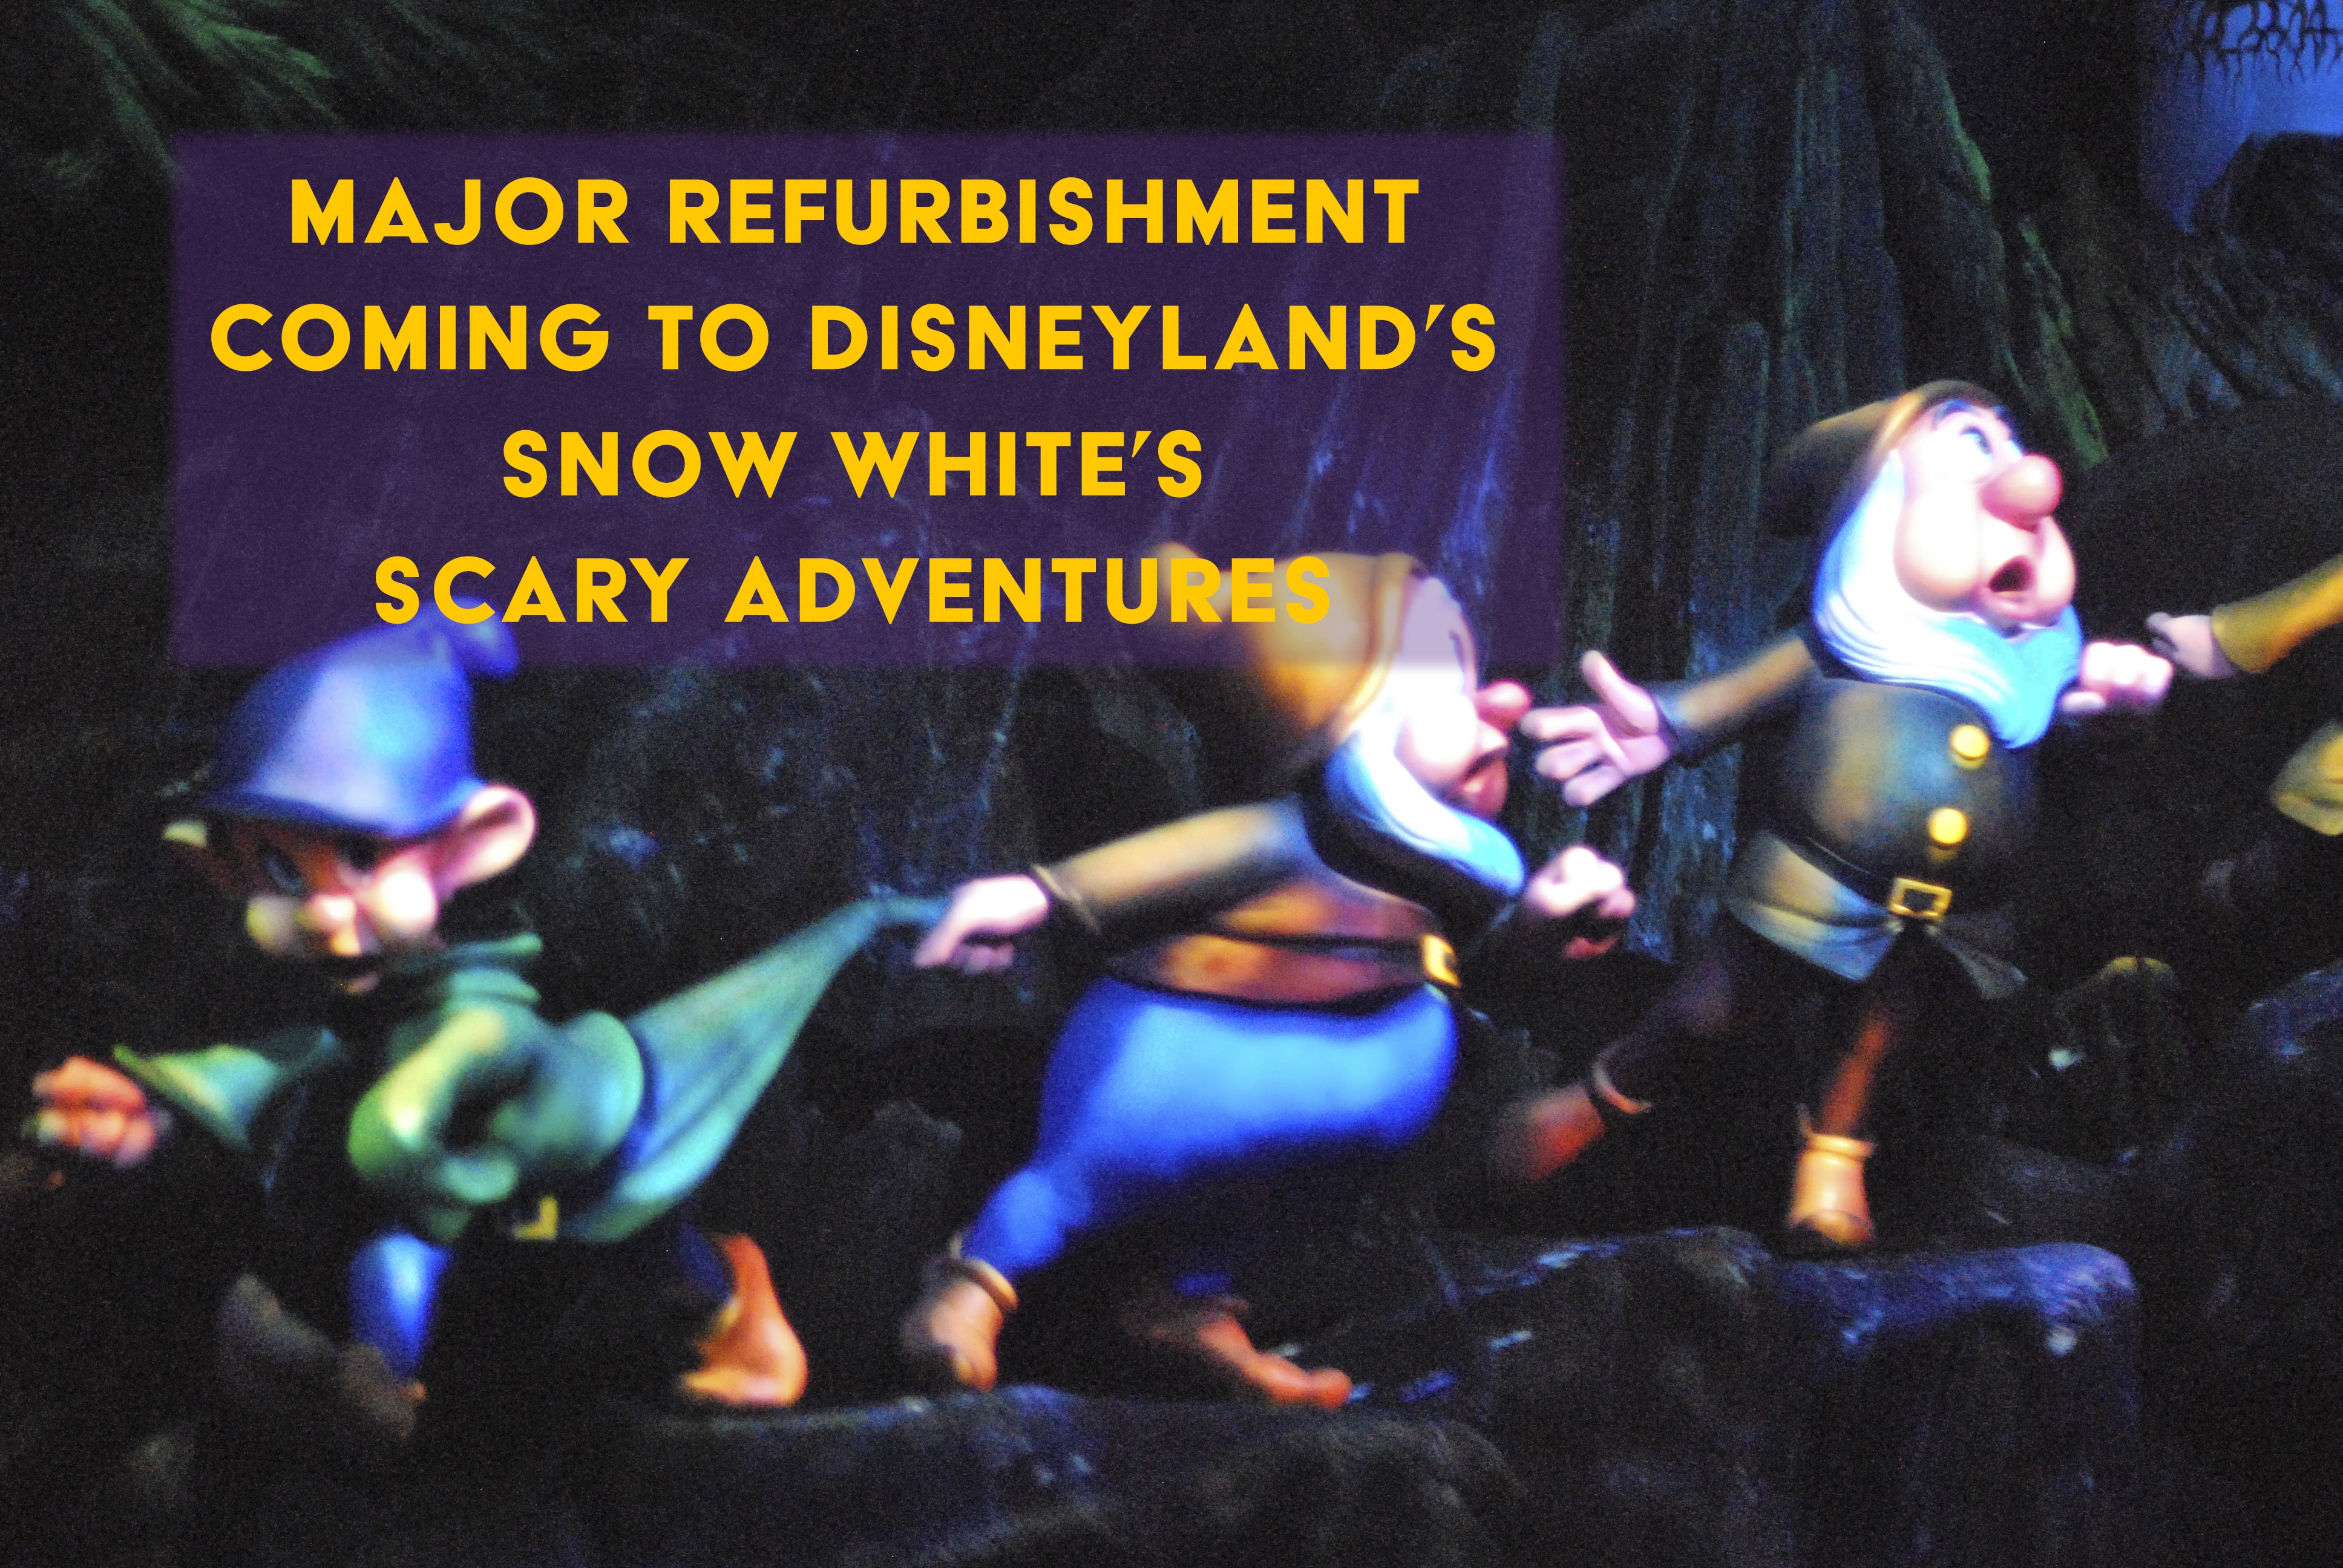 Changes Coming to Disneyland’s Snow White’s Scary Adventures in 2020 with Major Refurbishment